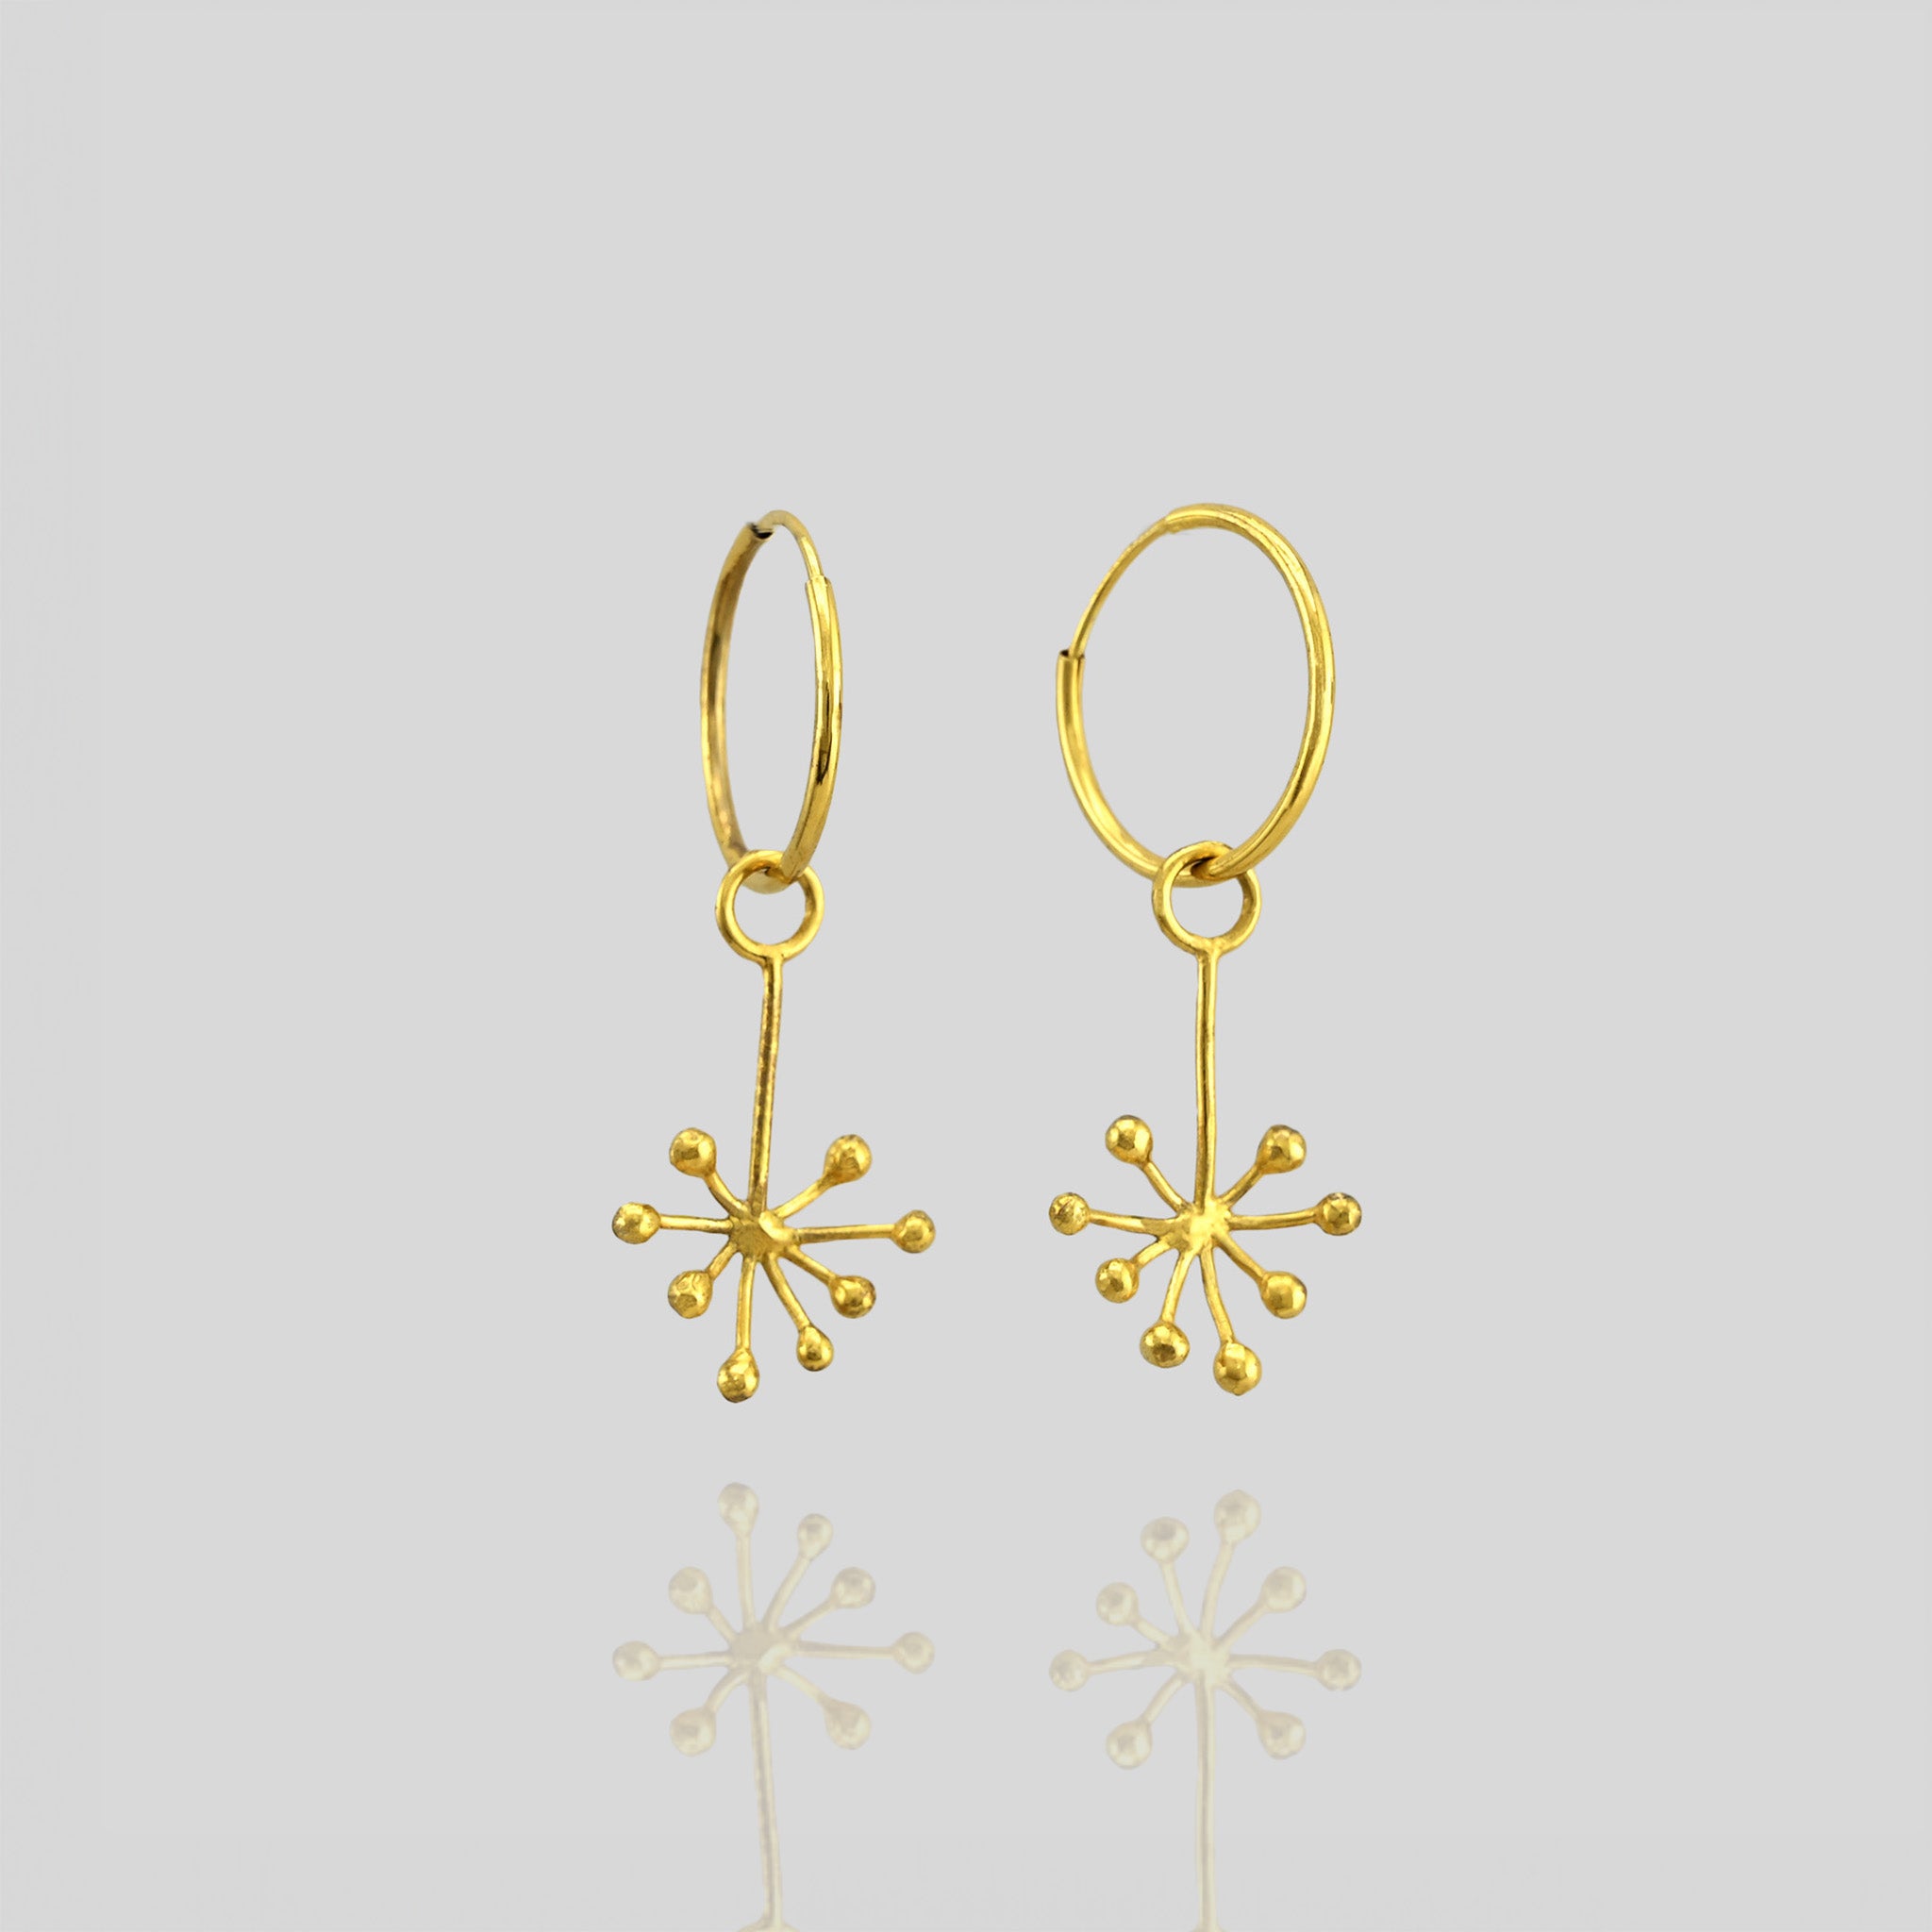 Close up of delicate 18k yellow gold earrings featuring an intricate snowflake design formed by thin, radiating gold lines. The design exudes a subtle yet playful aesthetic.